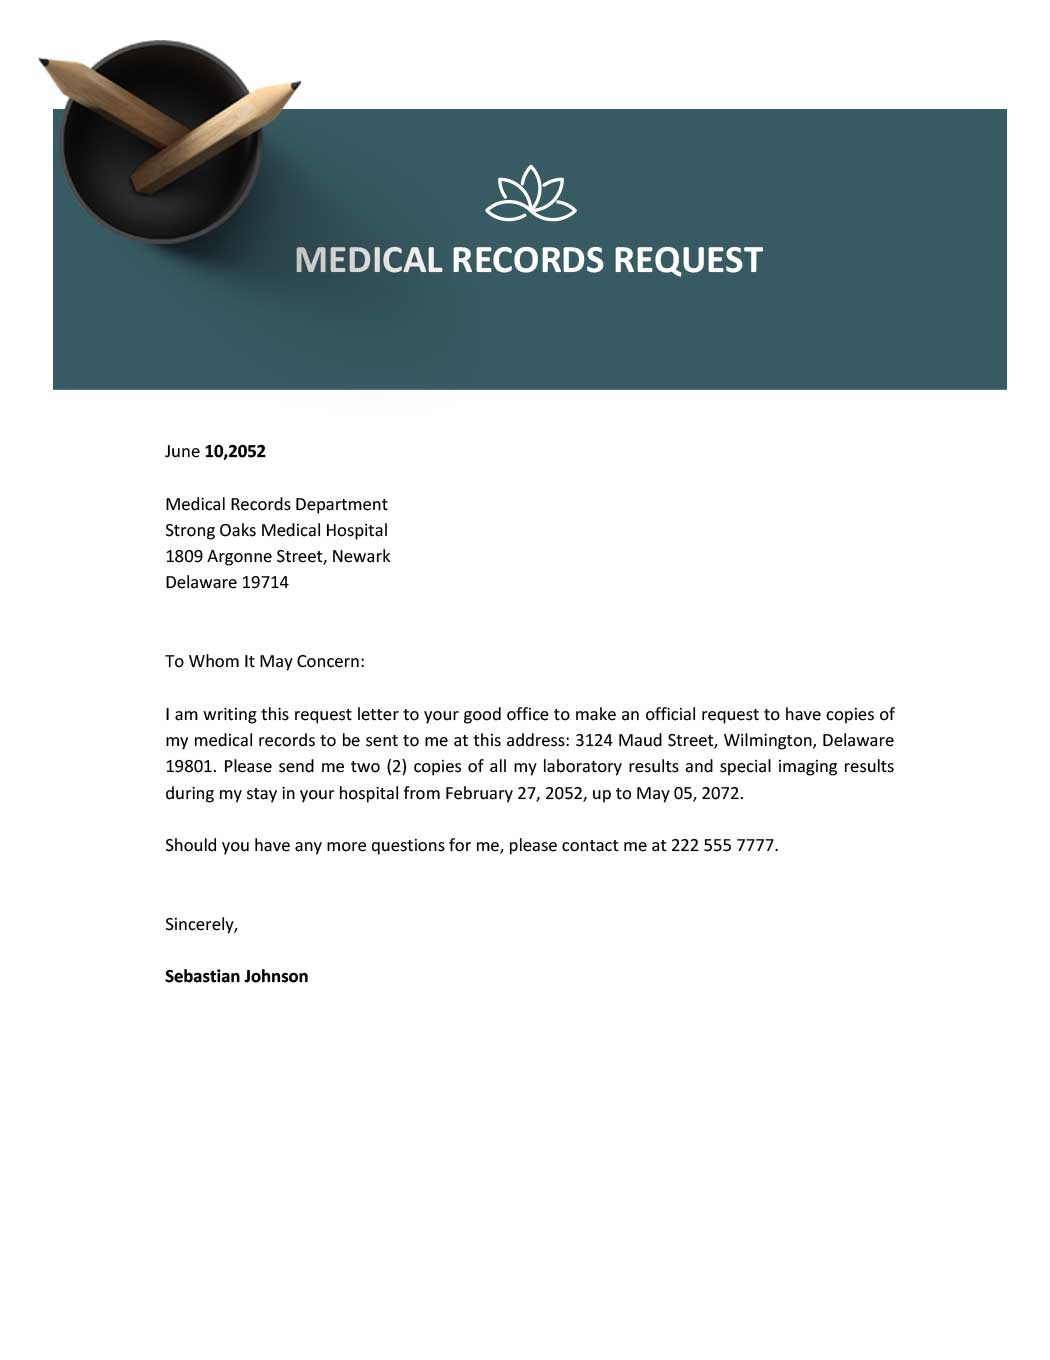 Printable Medical Records Request Example